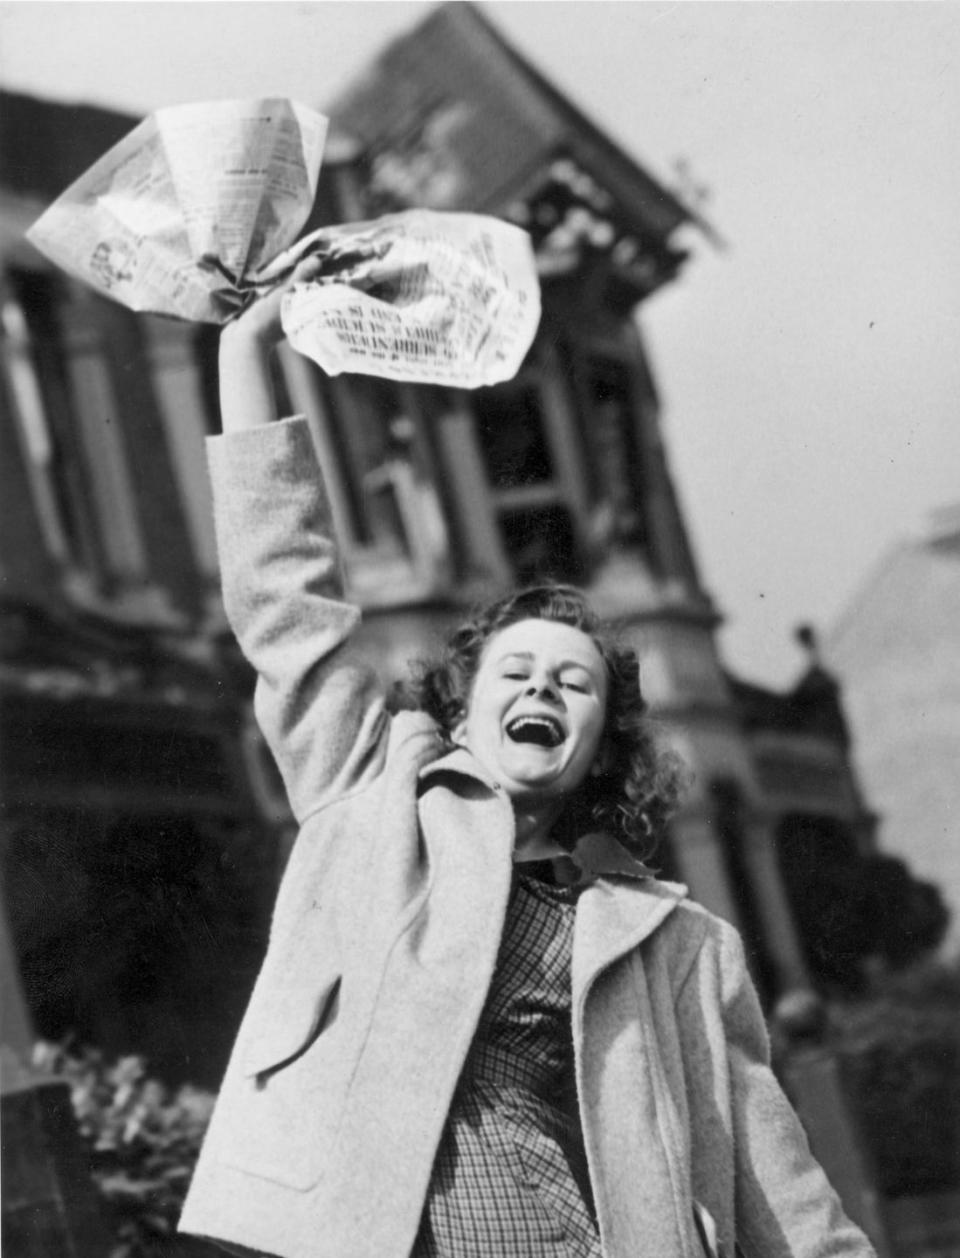 40 Photos Capturing the Day World War II Ended